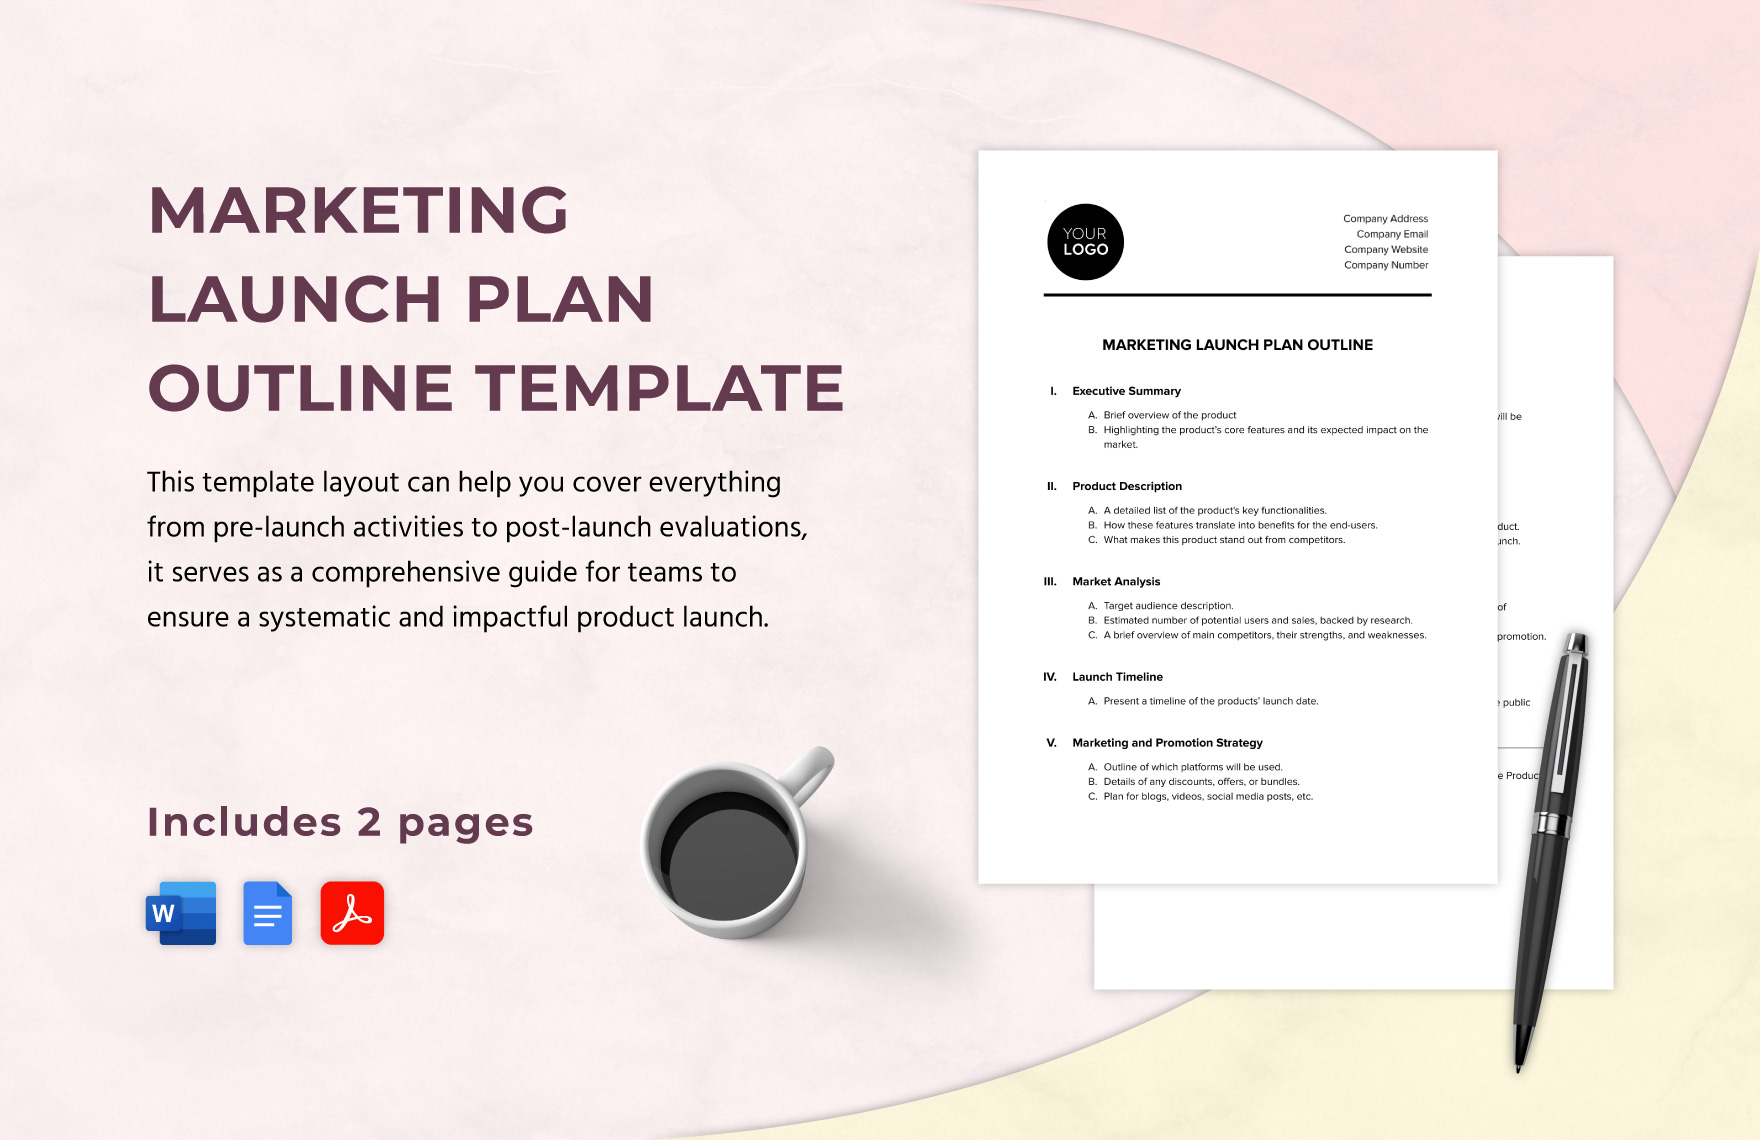 Marketing Launch Plan Outline Template